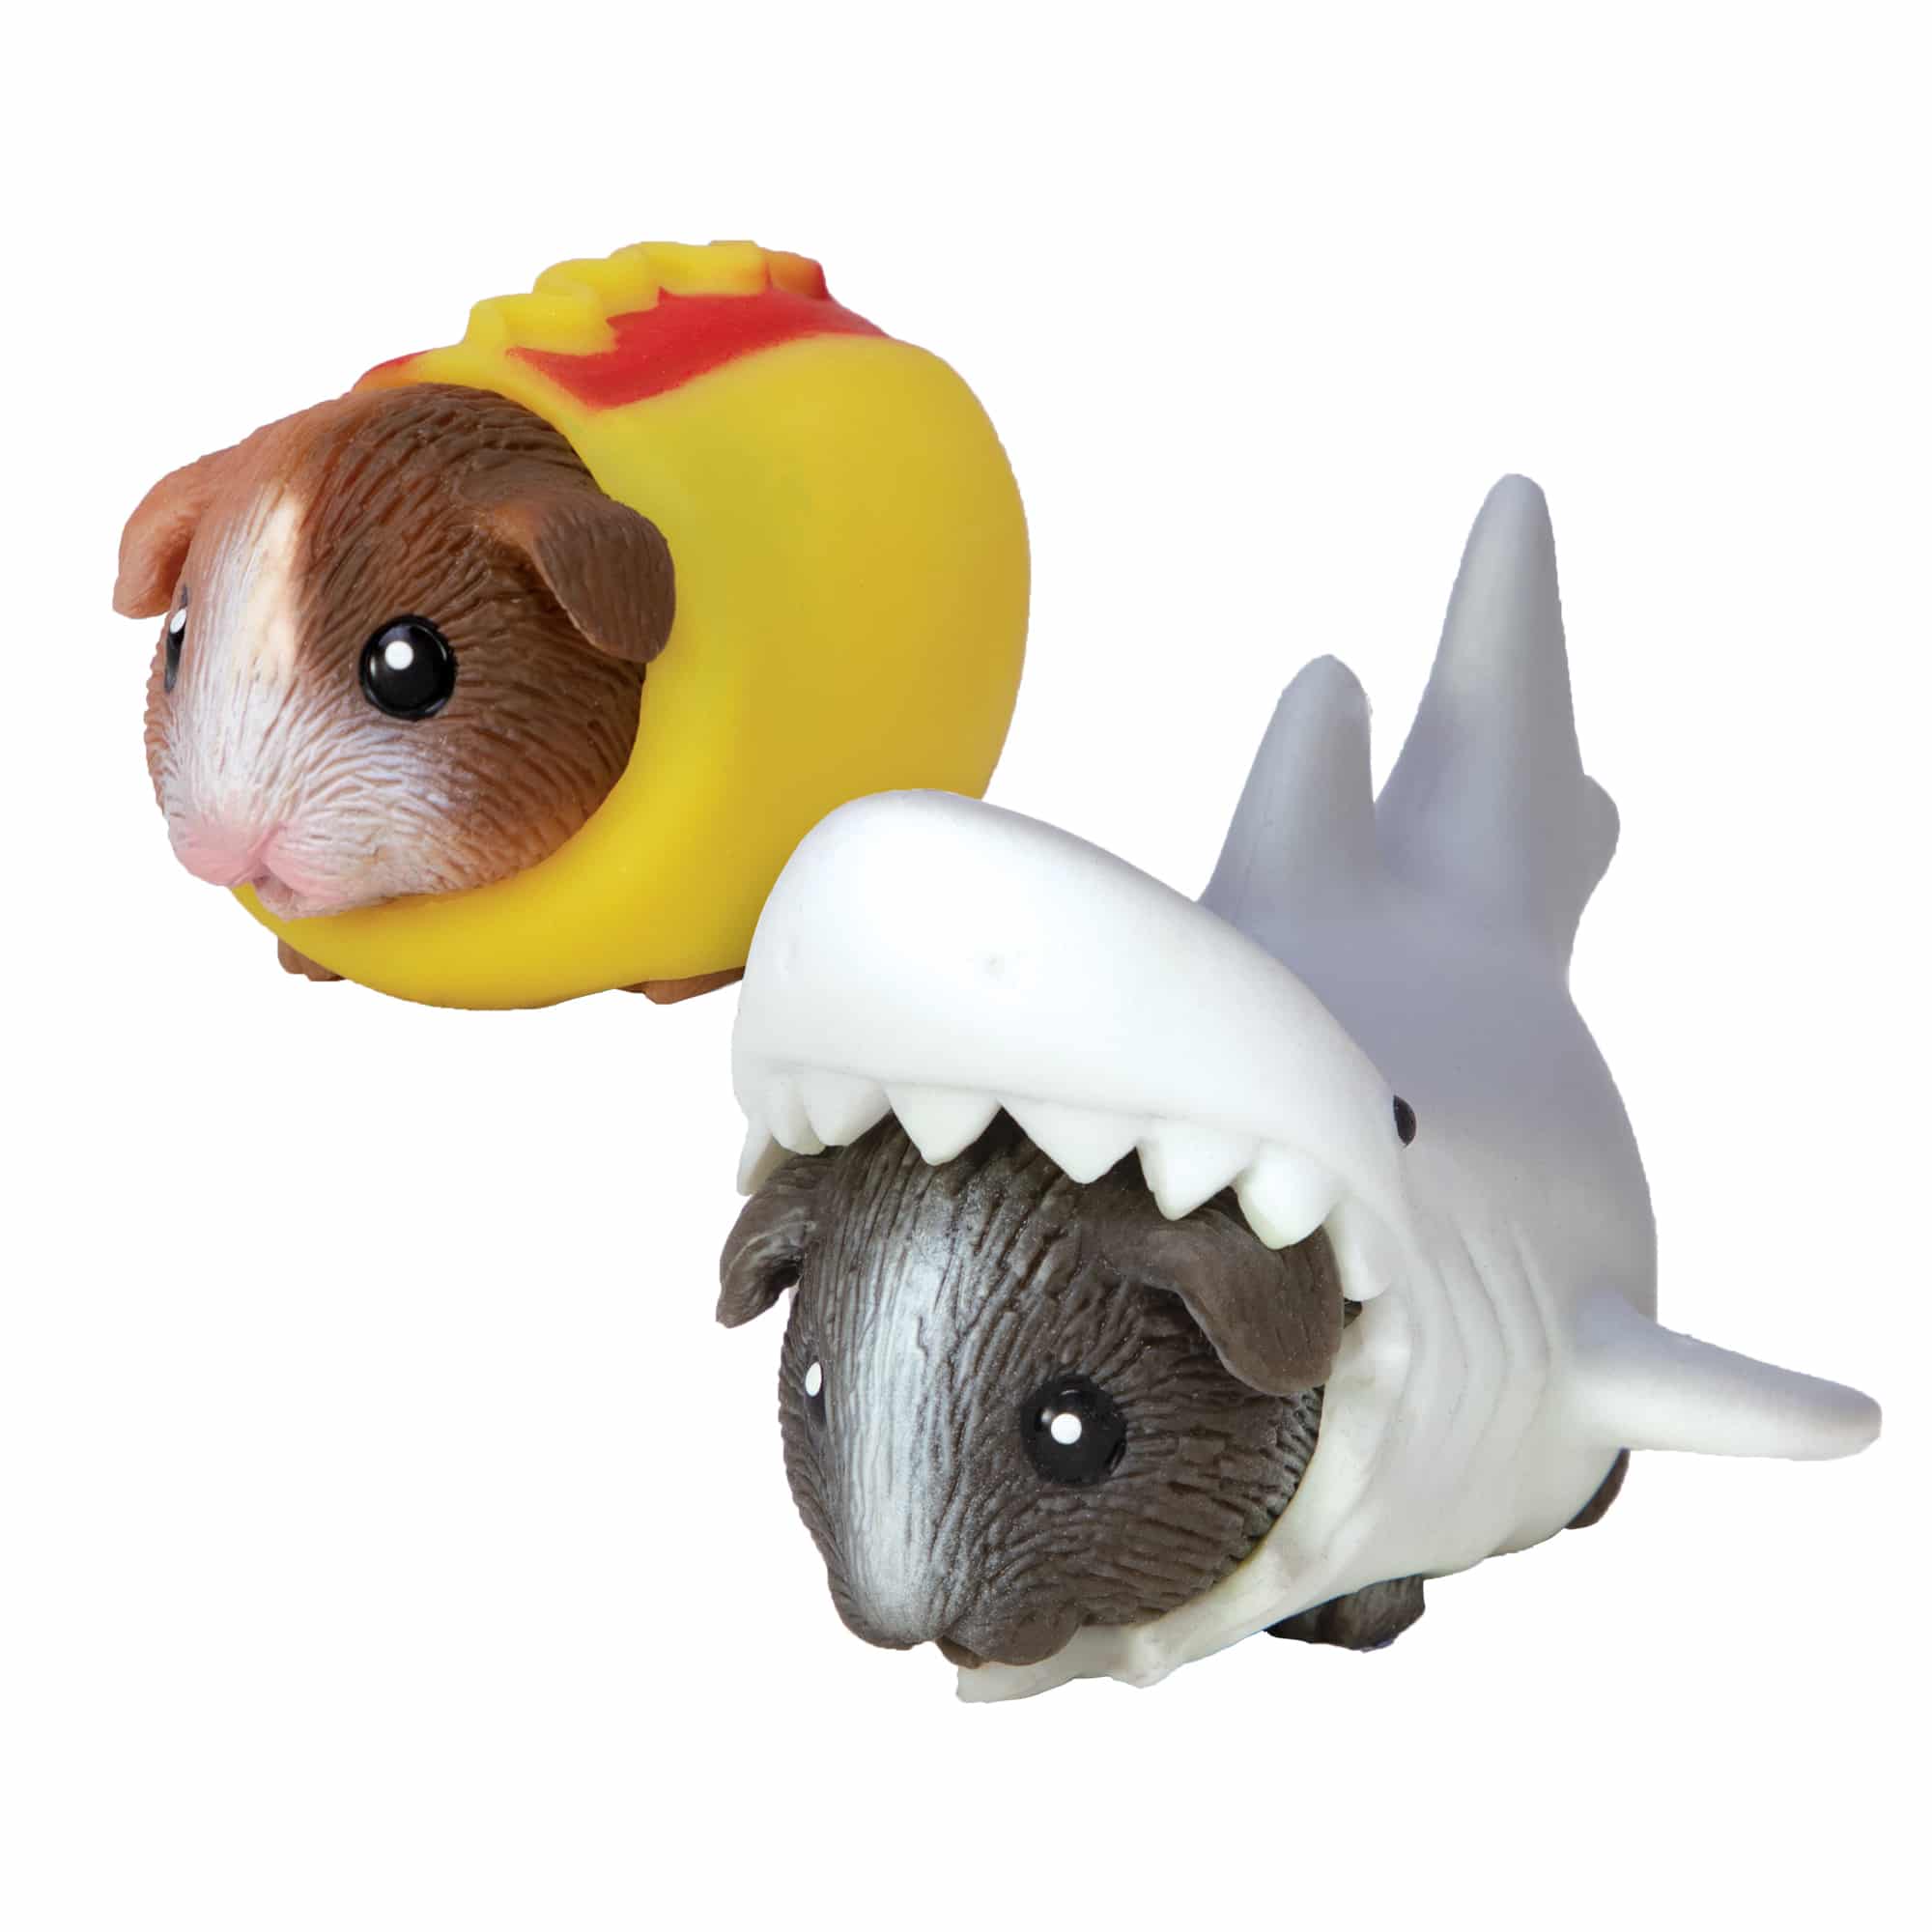 Two Guinea Pig toys, one in a hot dog outfit, the other in a shark